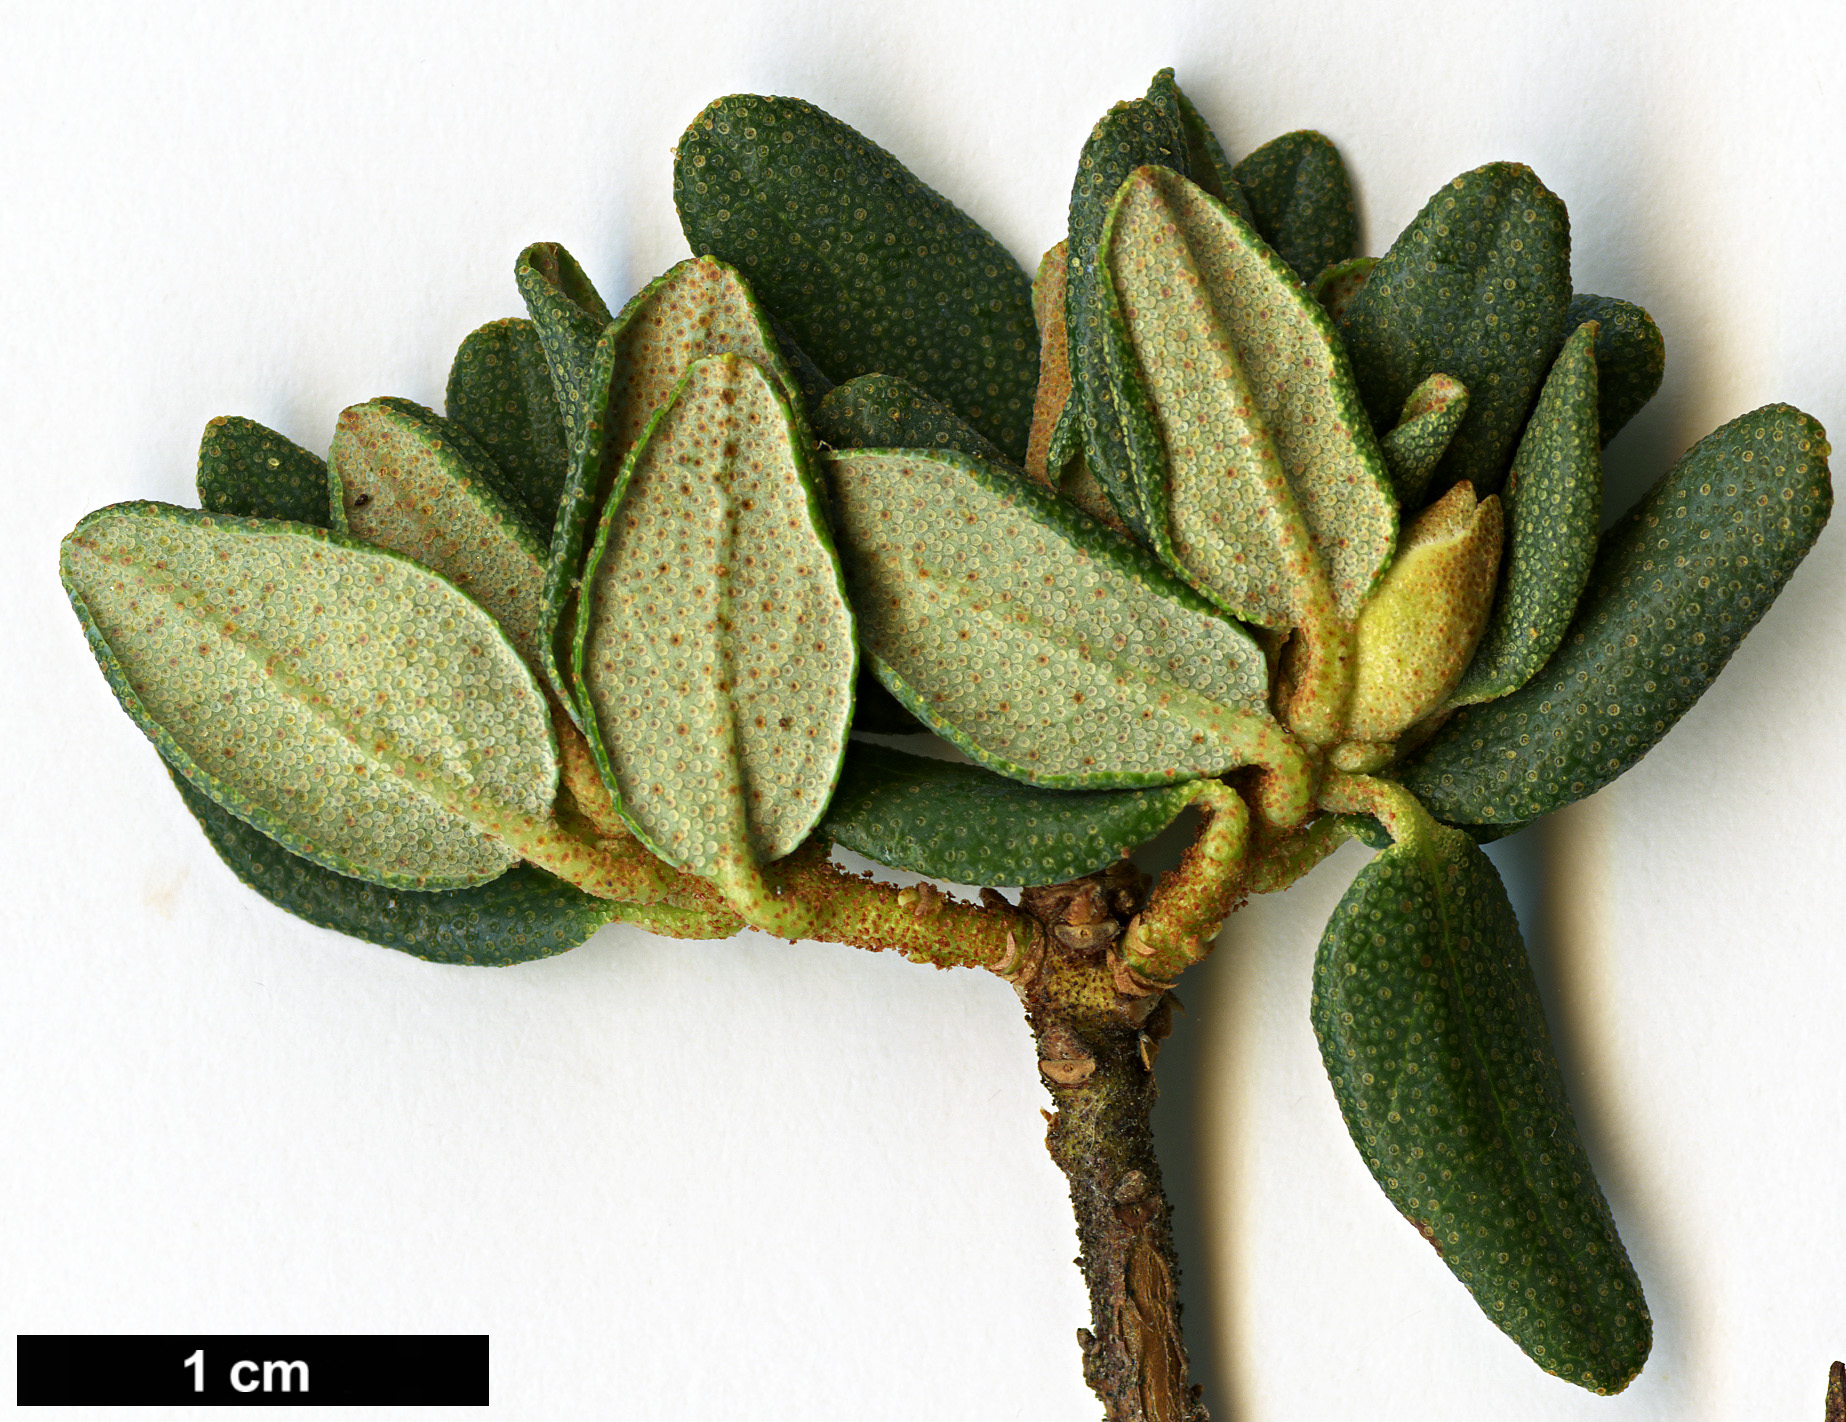 High resolution image: Family: Ericaceae - Genus: Rhododendron - Taxon: impeditum